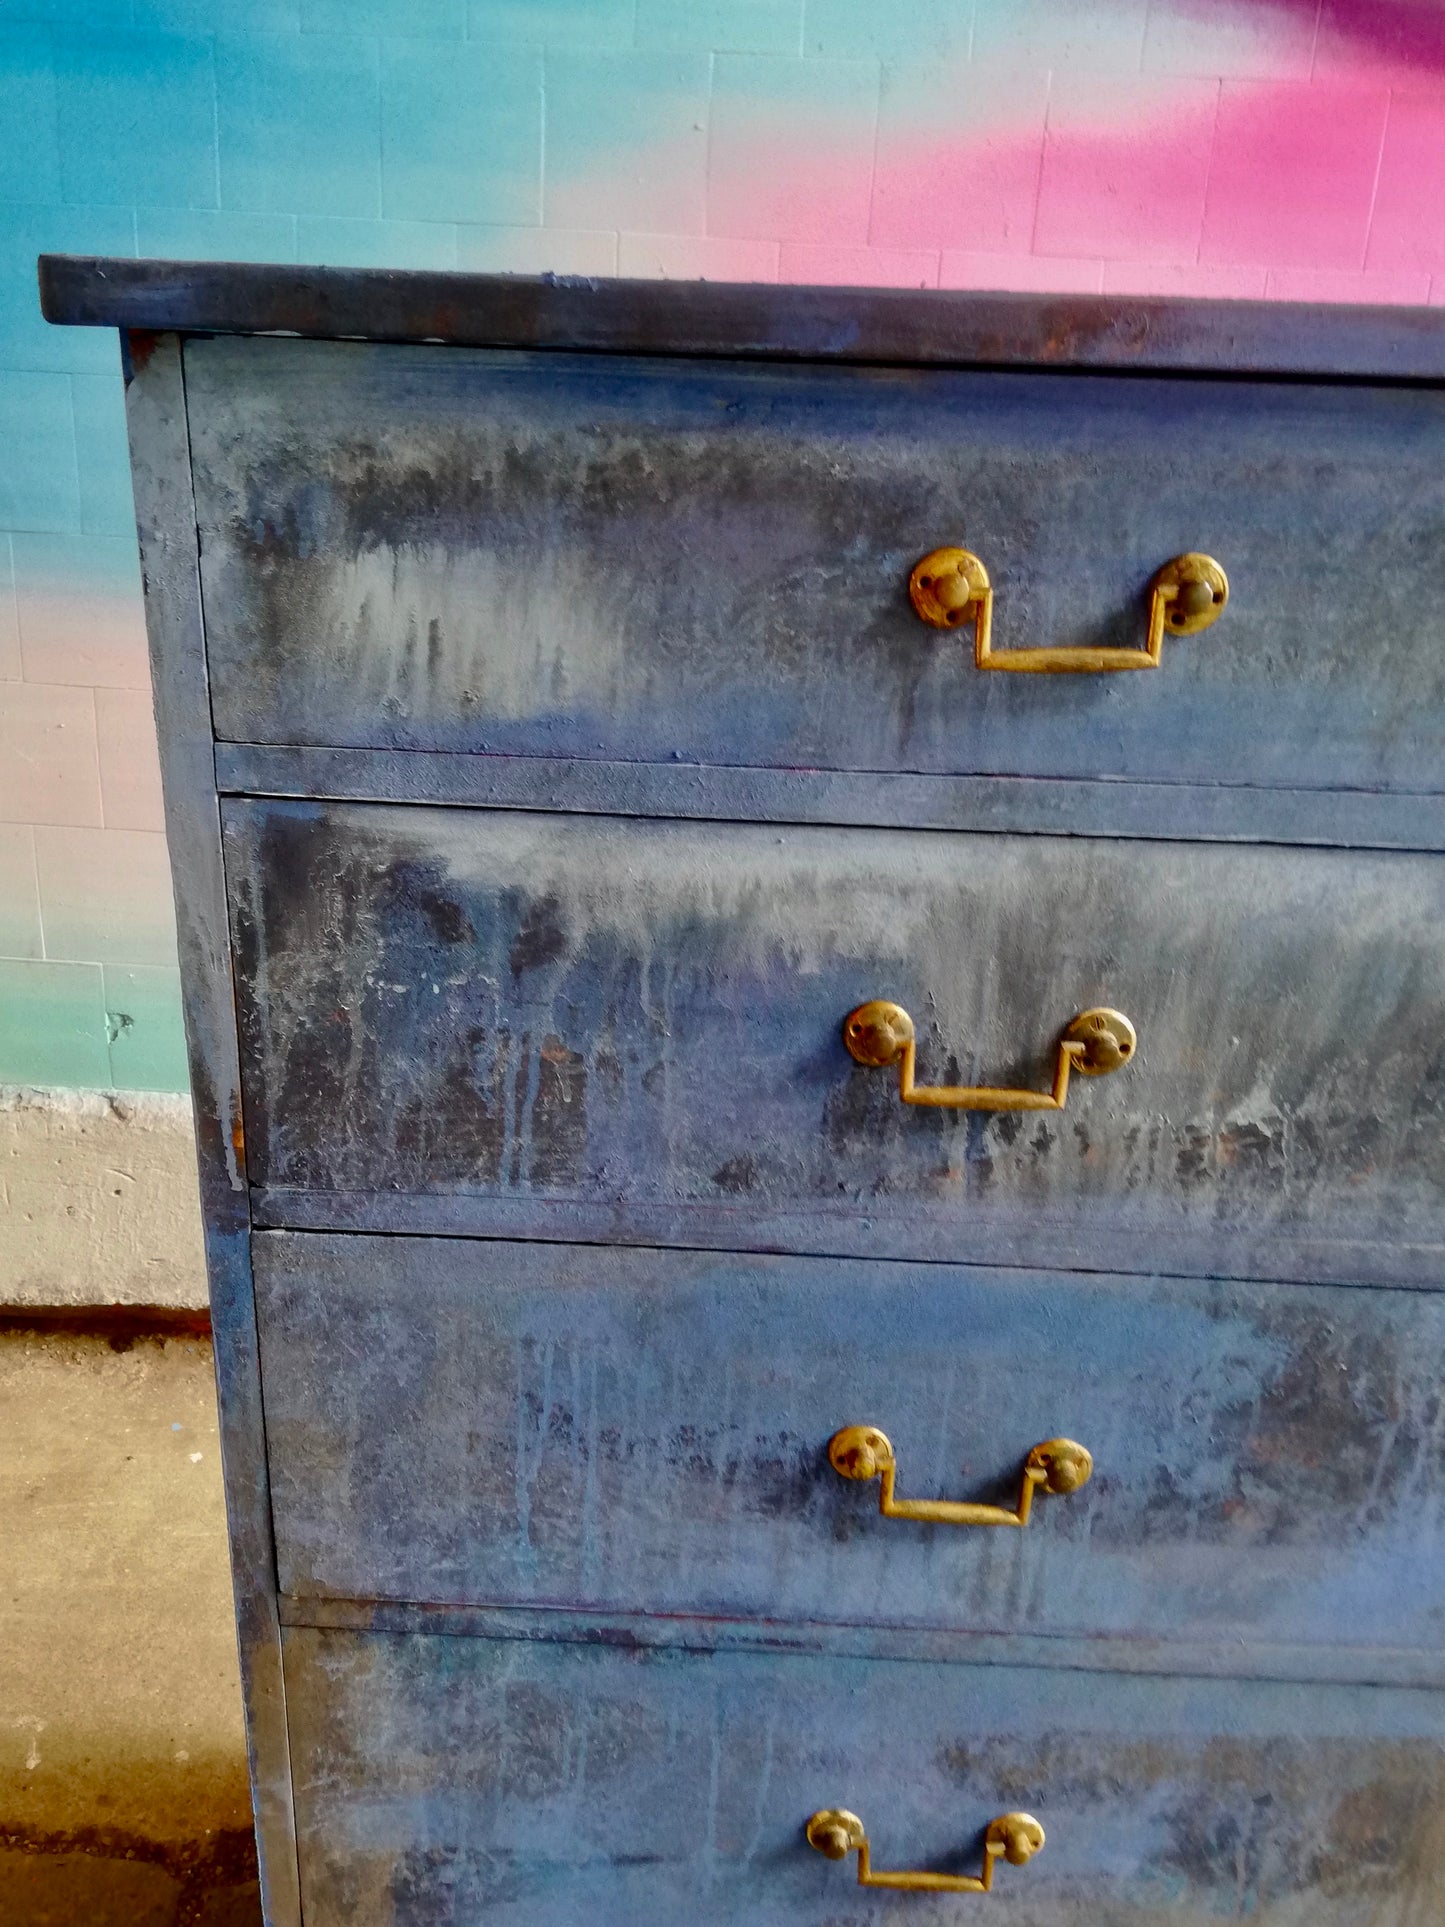 Painted to order - Vintage Chest of Drawers hand painted in a drippy layered look